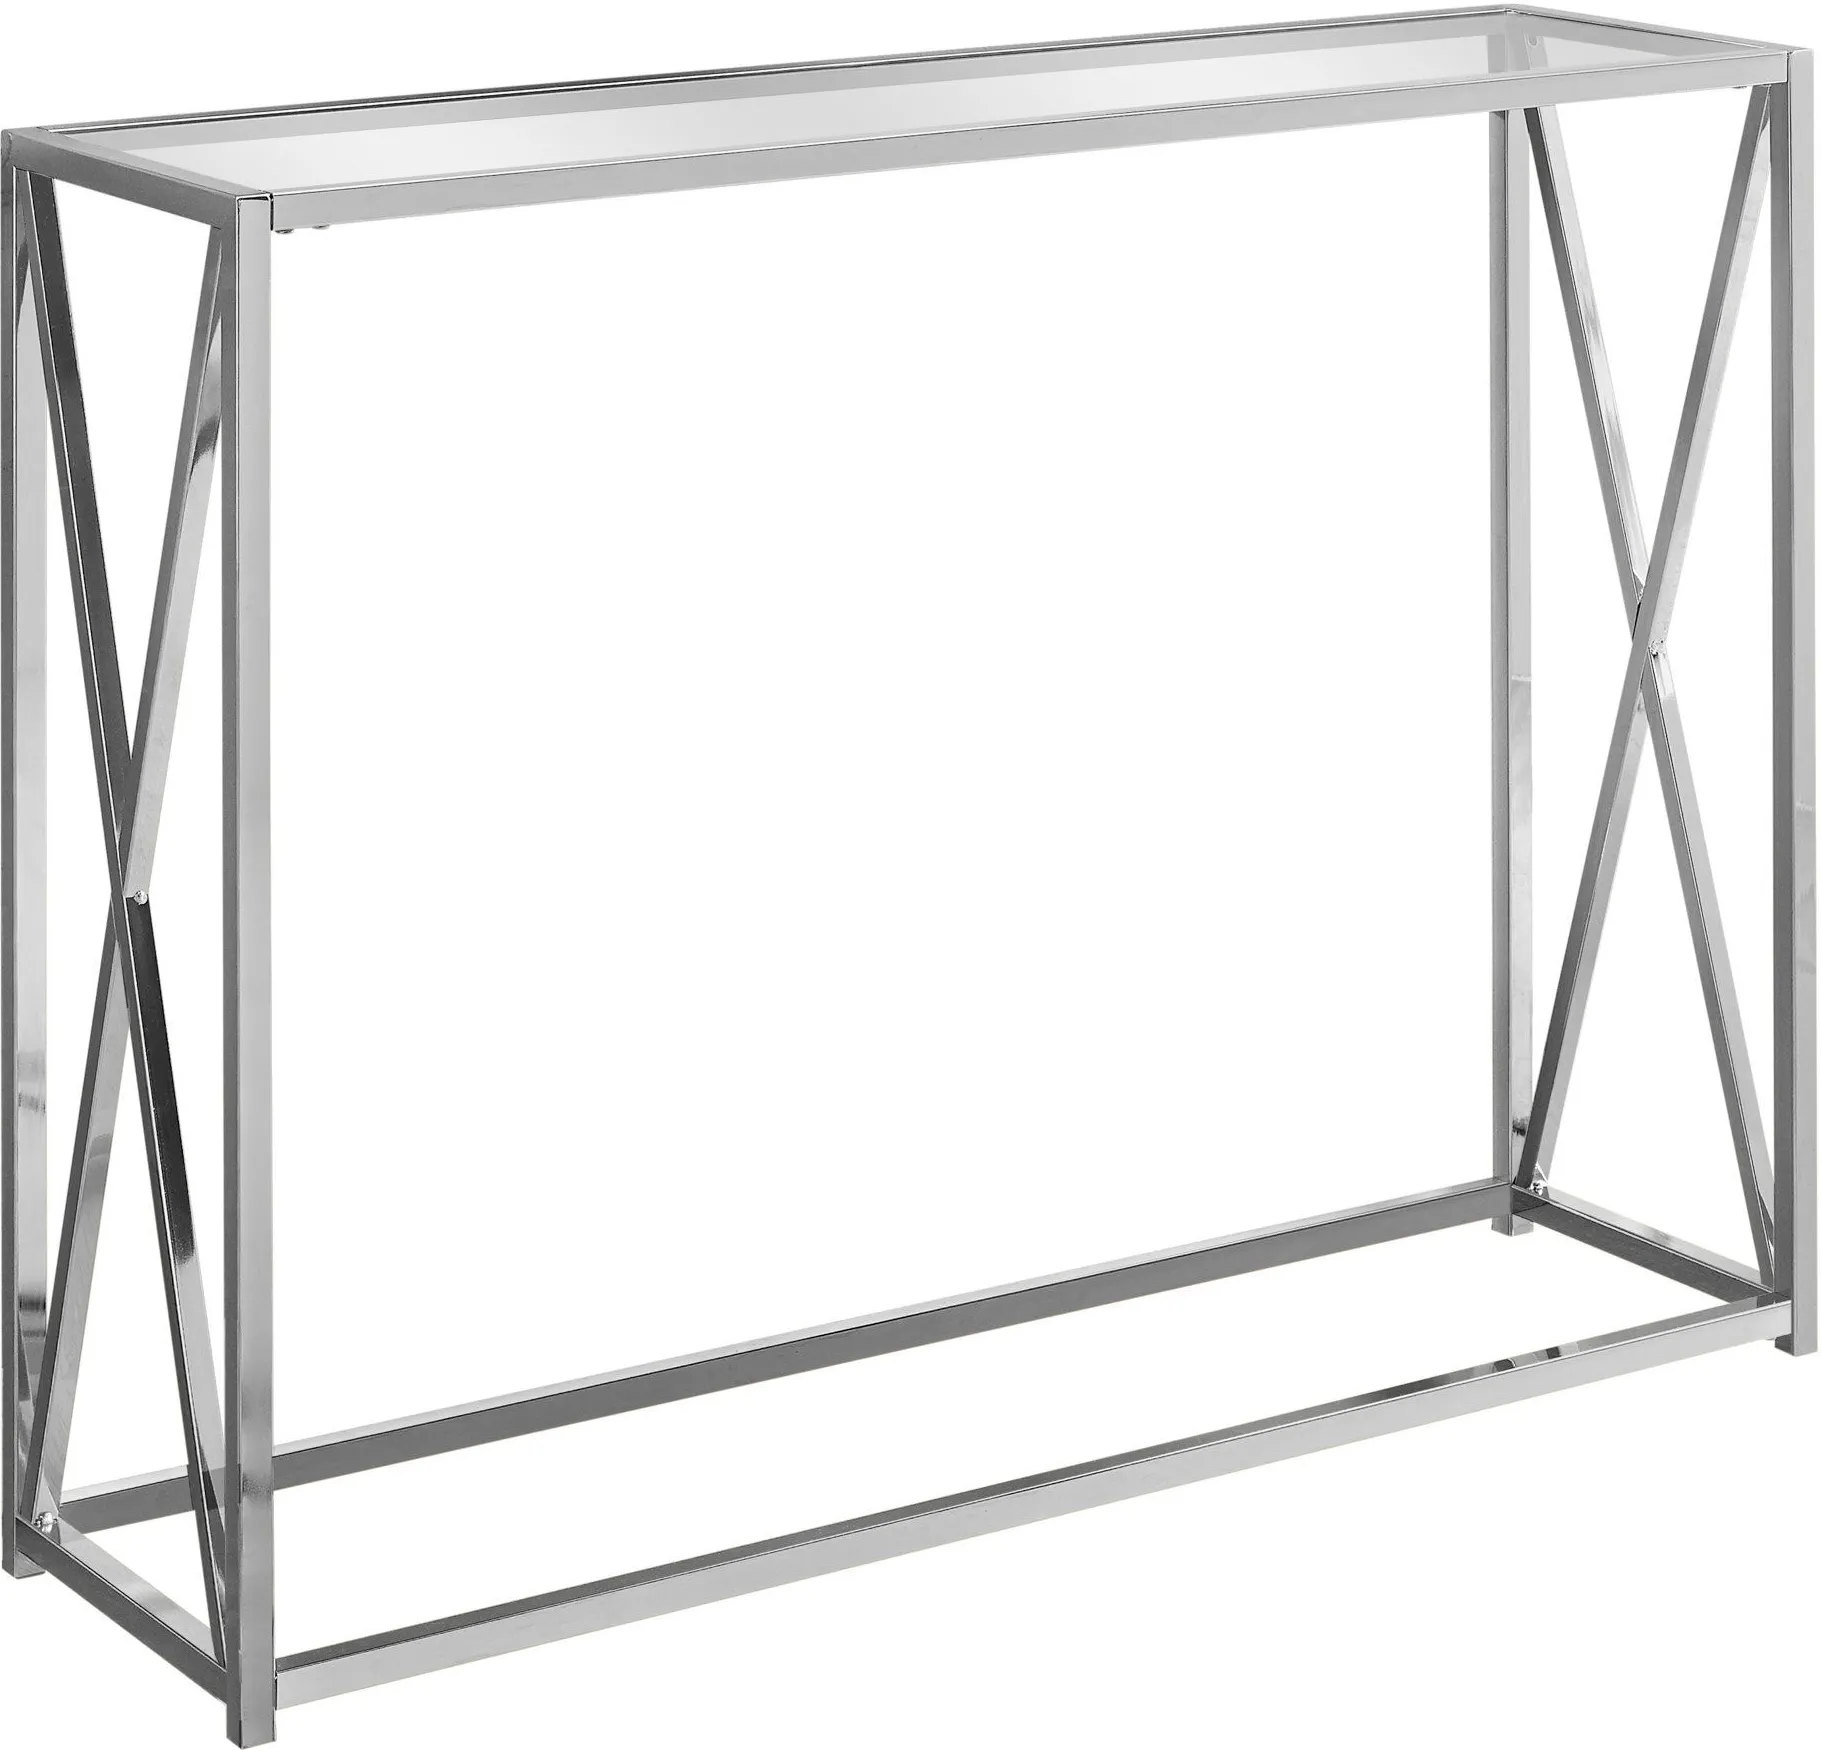 Accent Table, Console, Entryway, Narrow, Sofa, Living Room, Bedroom, Metal, Tempered Glass, Chrome, Clear, Contemporary, Modern